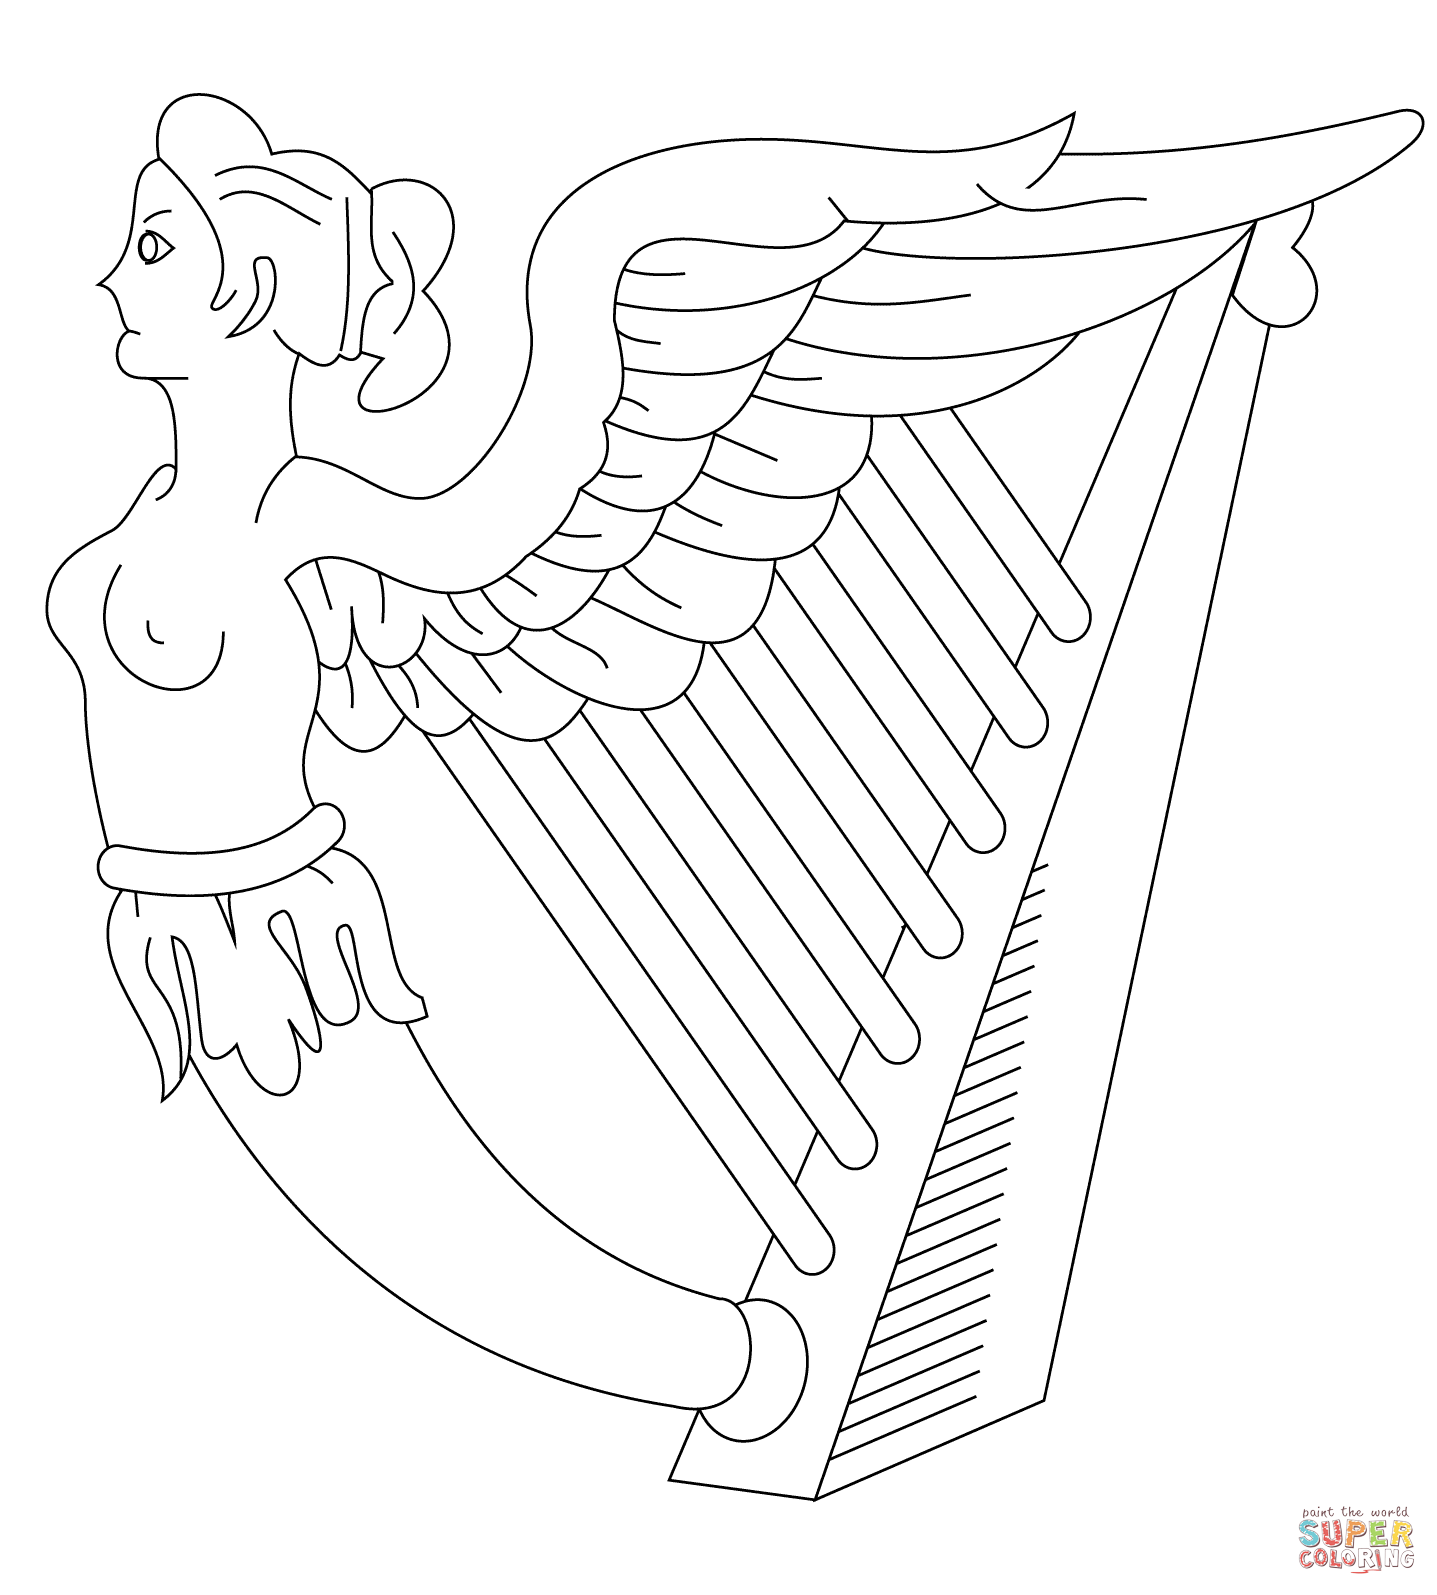 Harp of Ireland coloring page